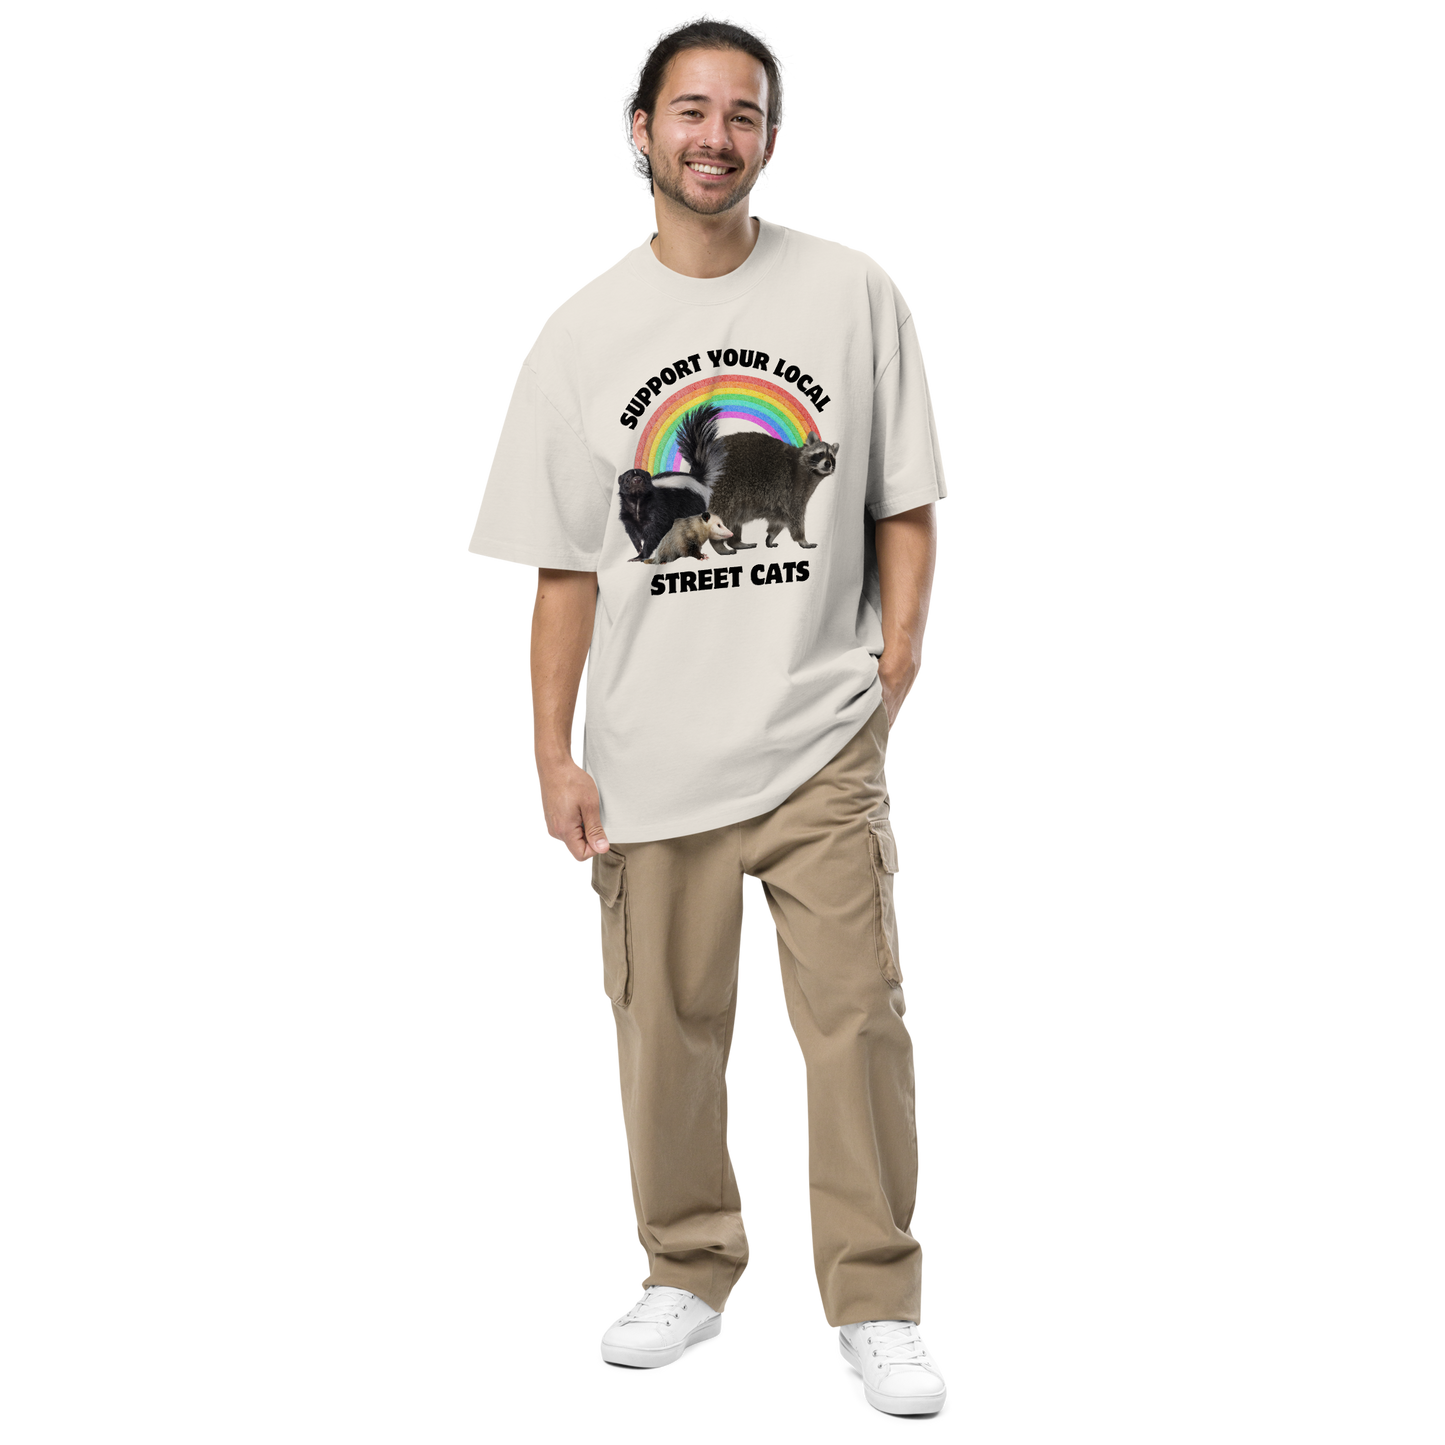 Smiling man wearing a Faded Bone Street Cats Oversized T-Shirt featuring a purr-fect trio – opossum, skunk, raccoon – and the Support Your Local Street Cats graphic on the chest - Funny Graphic Animal Oversized Tees - Boozy Fox